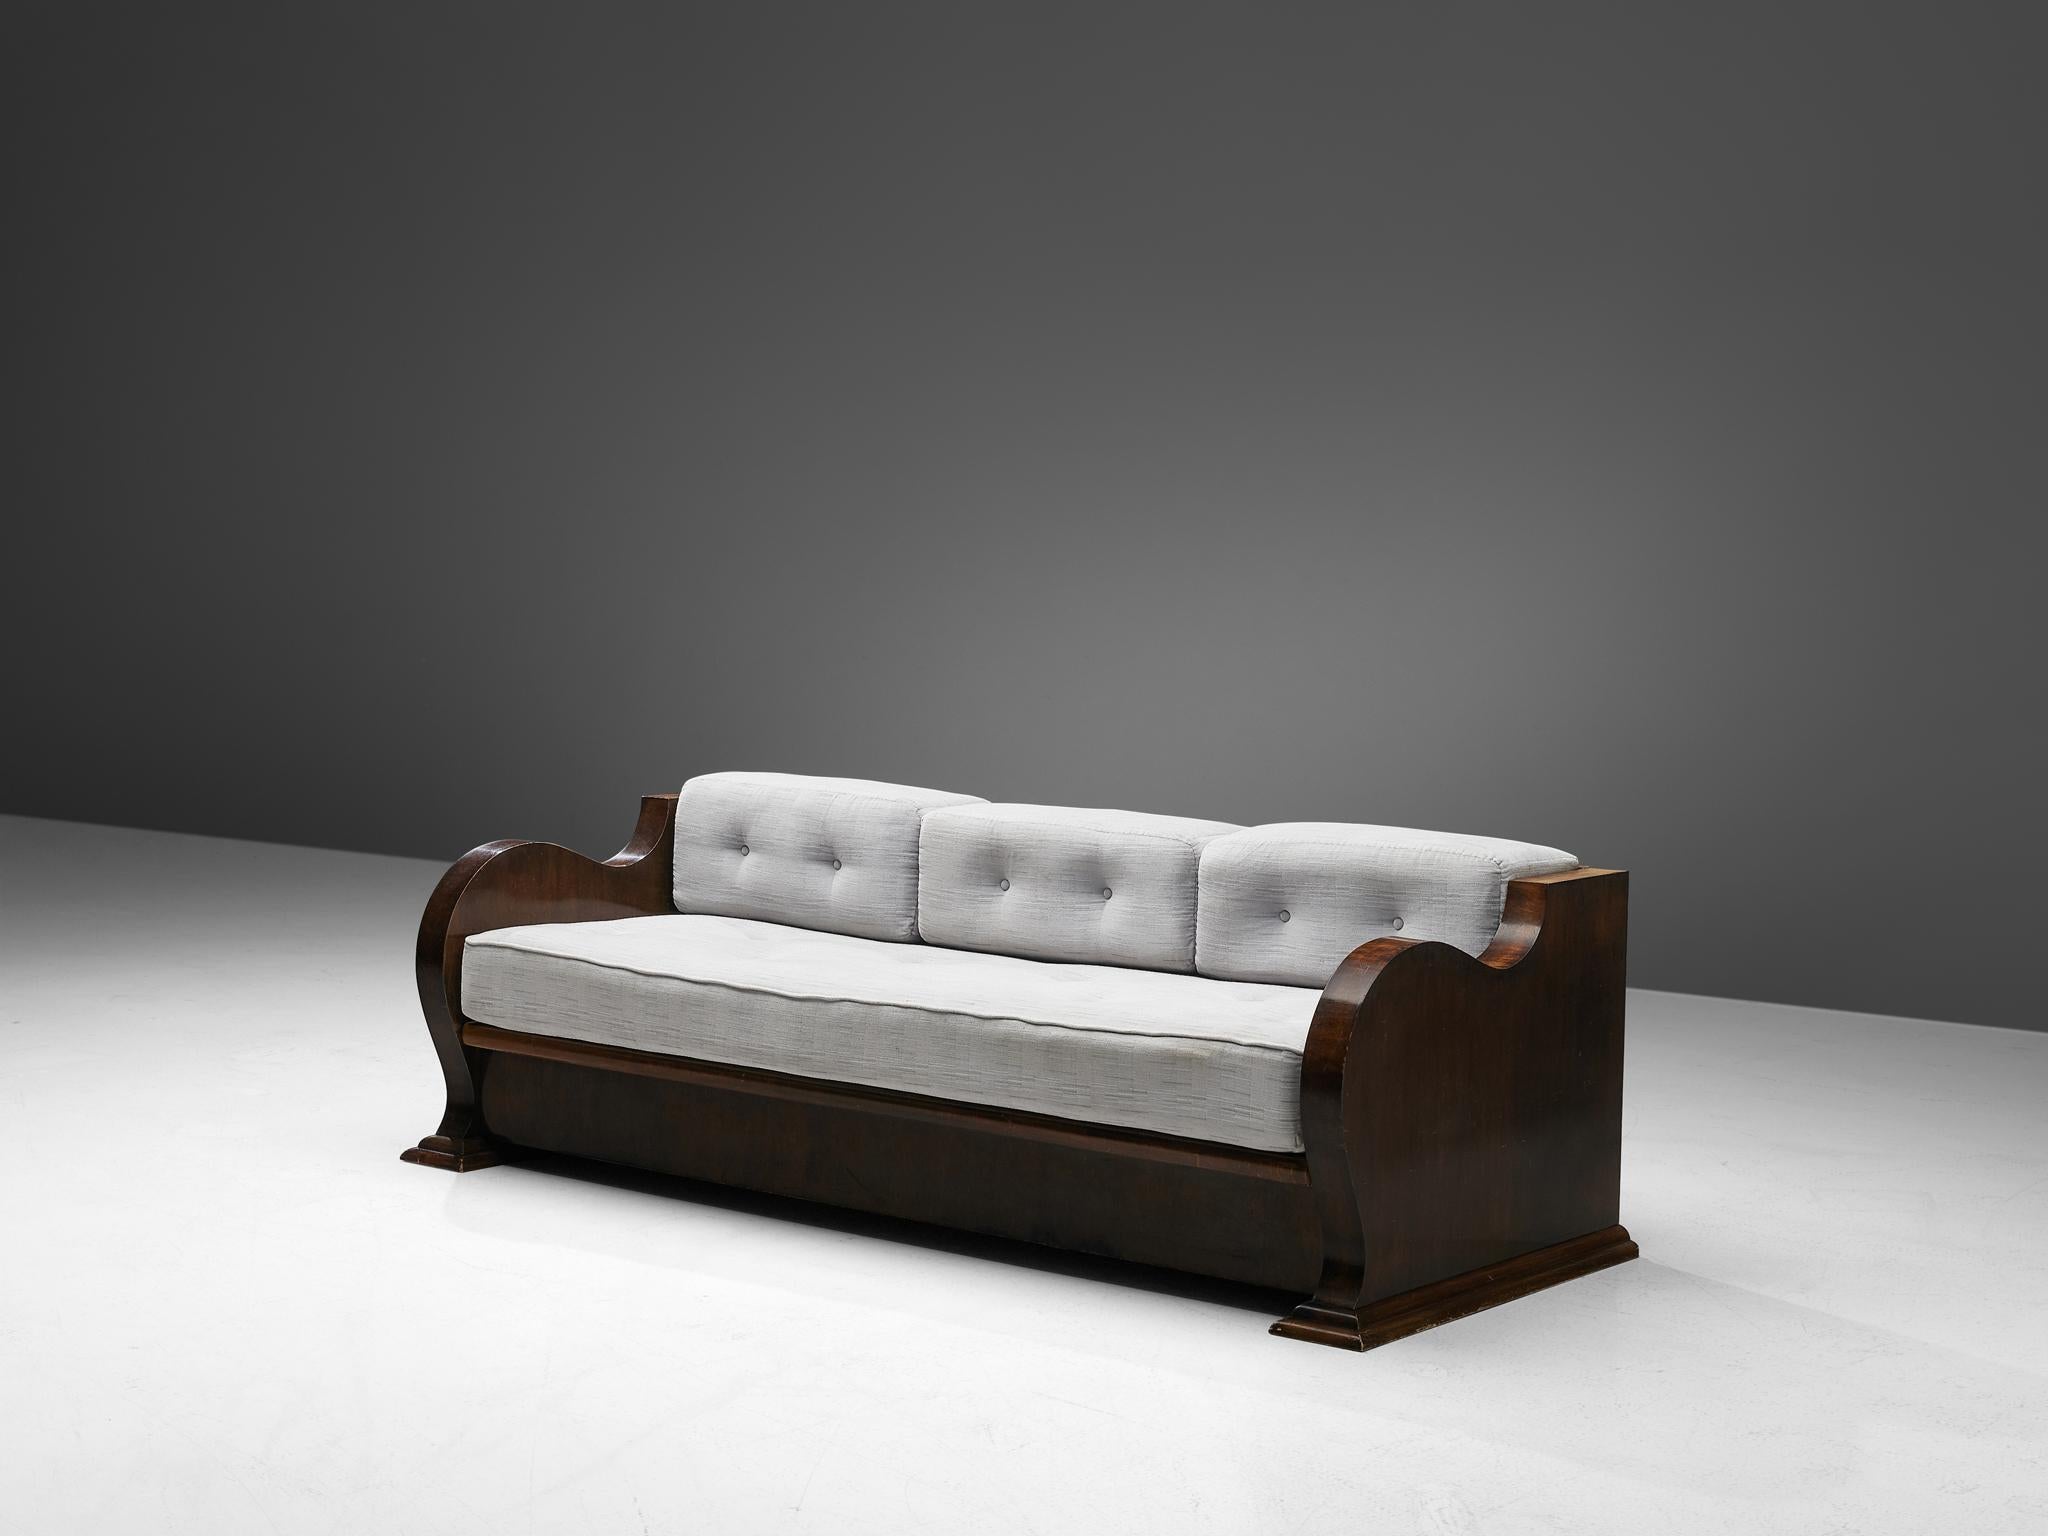 Sofa-bed, walnut, fabric, Austria, 1930s

An Art Deco sofa with loose cushions to turn it easily into a daybed. The design features a sturdy, strong walnut veneered frame with large curvaceous armrests. The legs are short and form a balanced whole